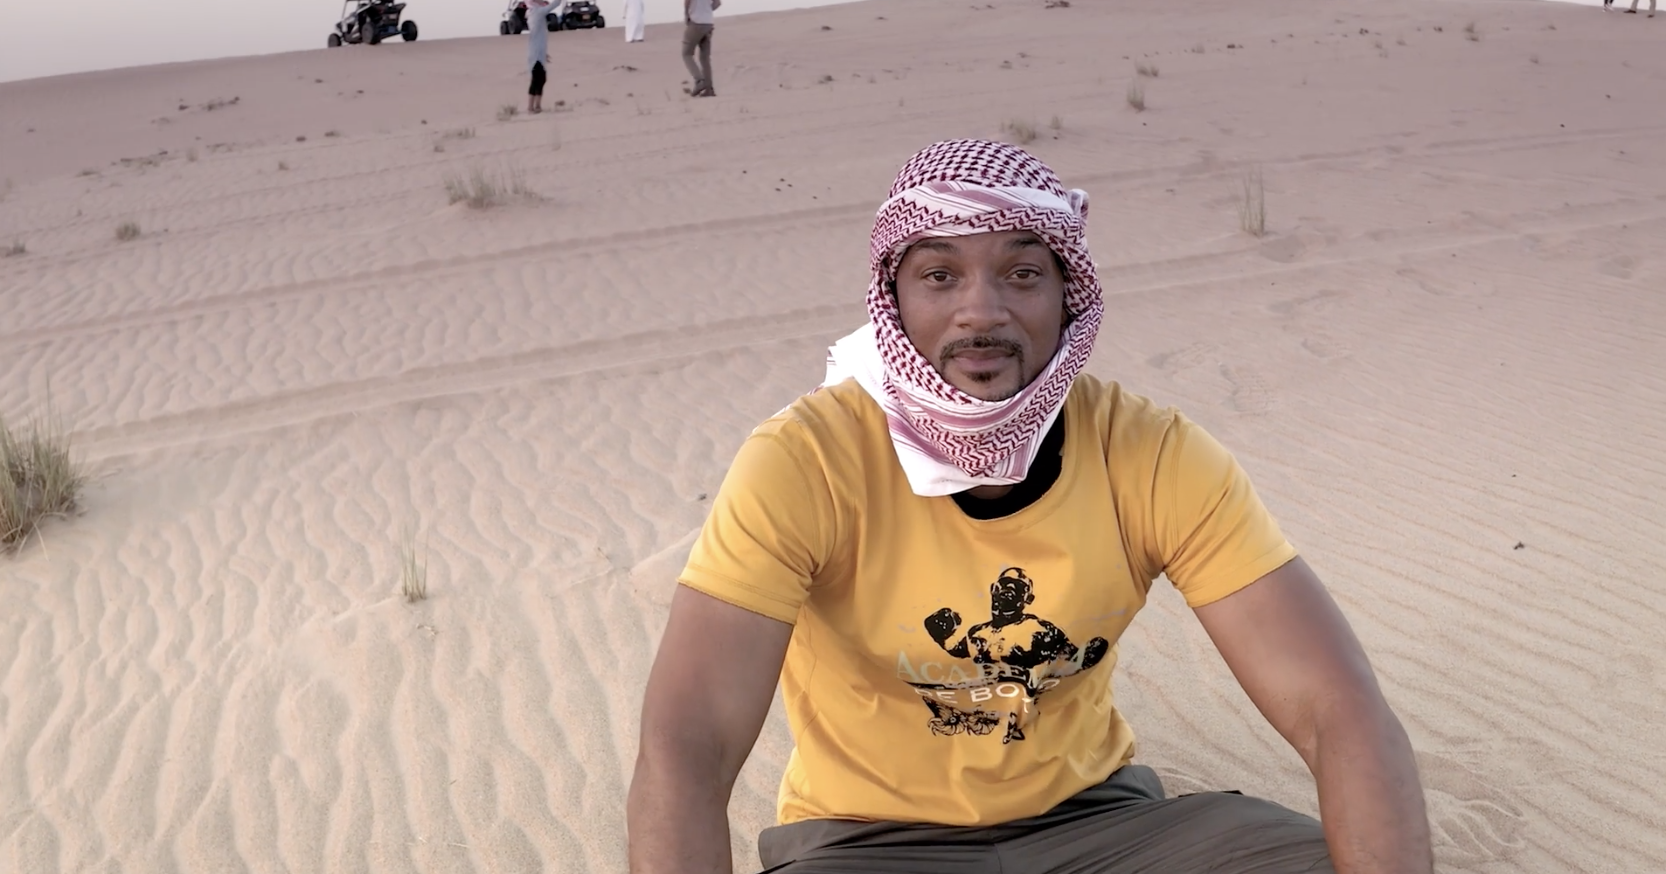 'Will Smith's Bucket List' Is The Travel Show We All Deserve